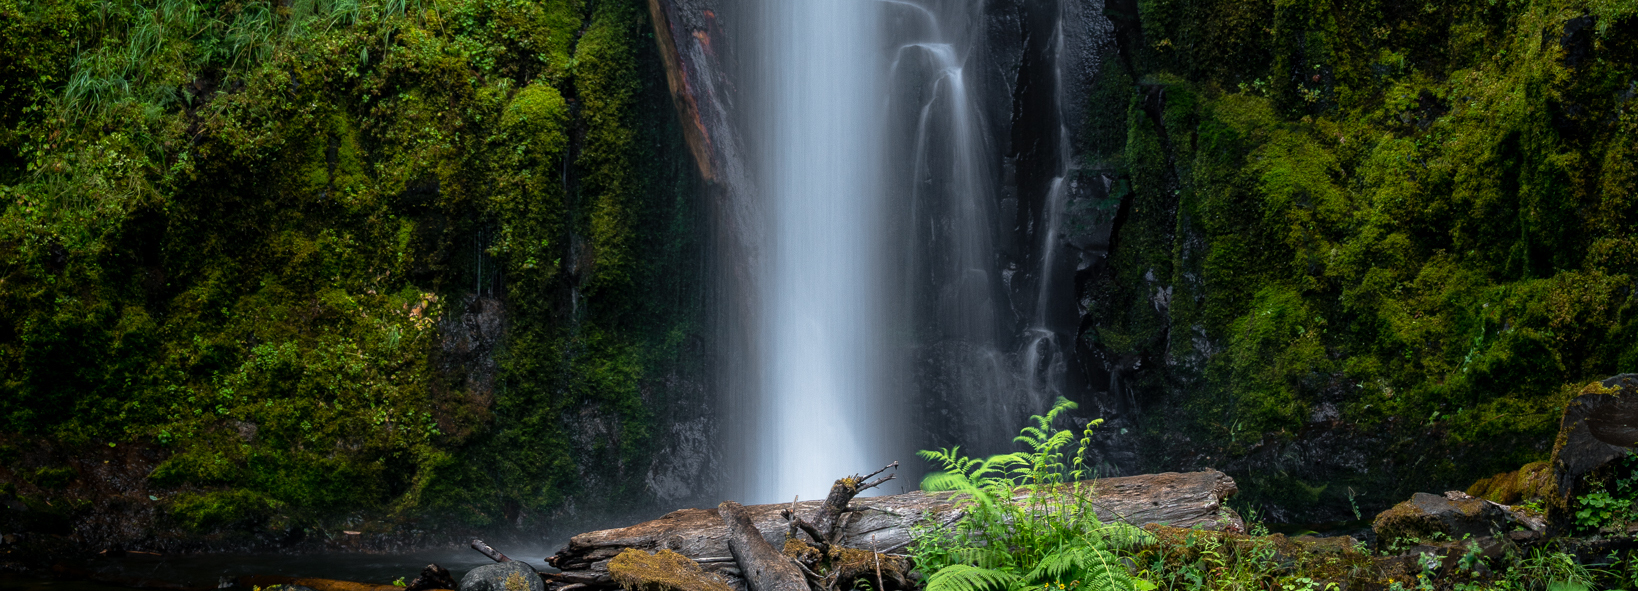 Dry Creek Falls Shot Wins Grand Prize in Friends' Sixth Annual Photo Contest